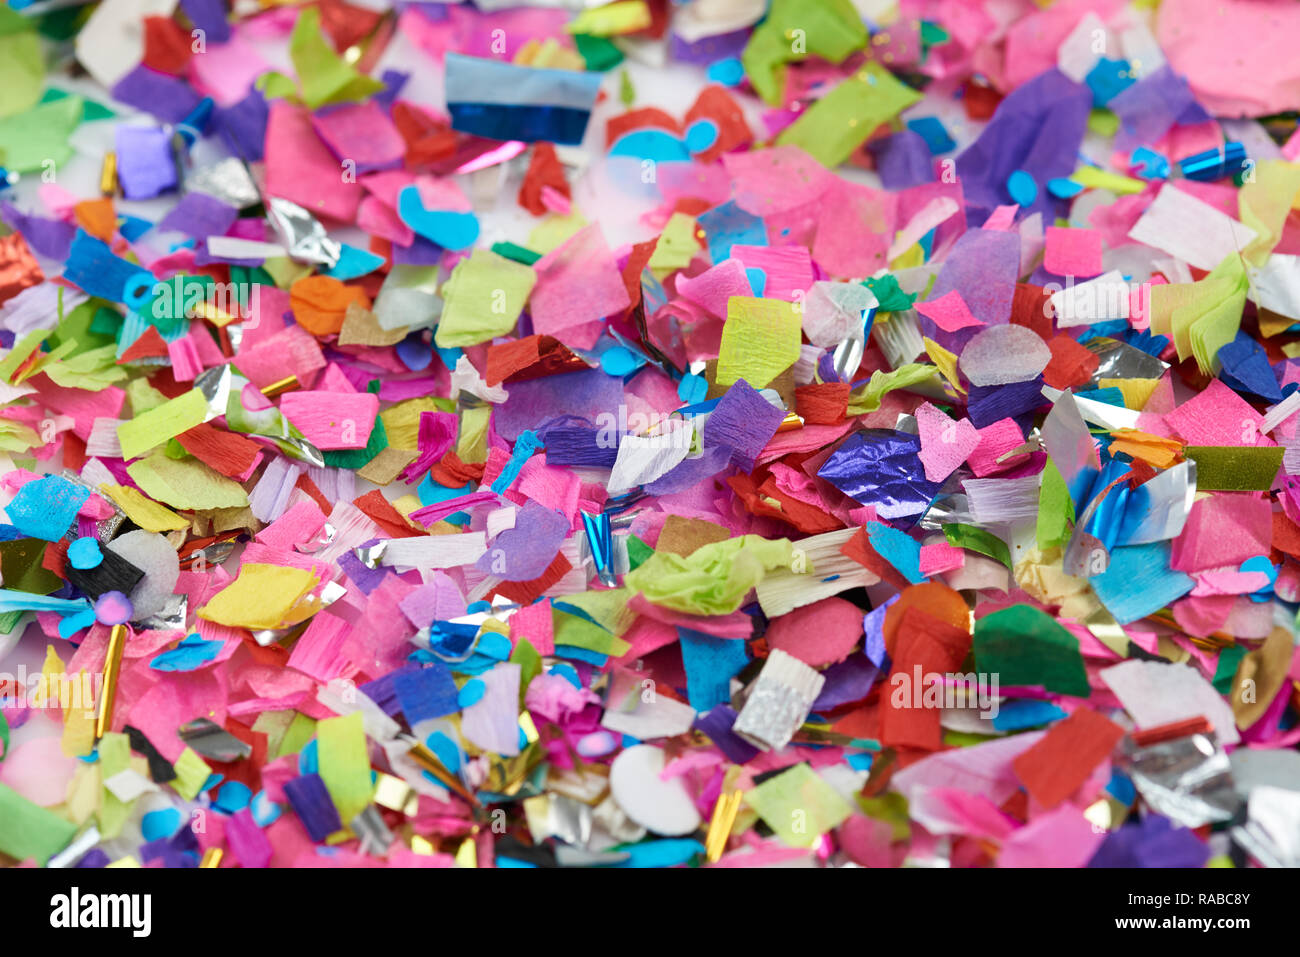 Selective focus on colorful confetti paper pieces Stock Photo